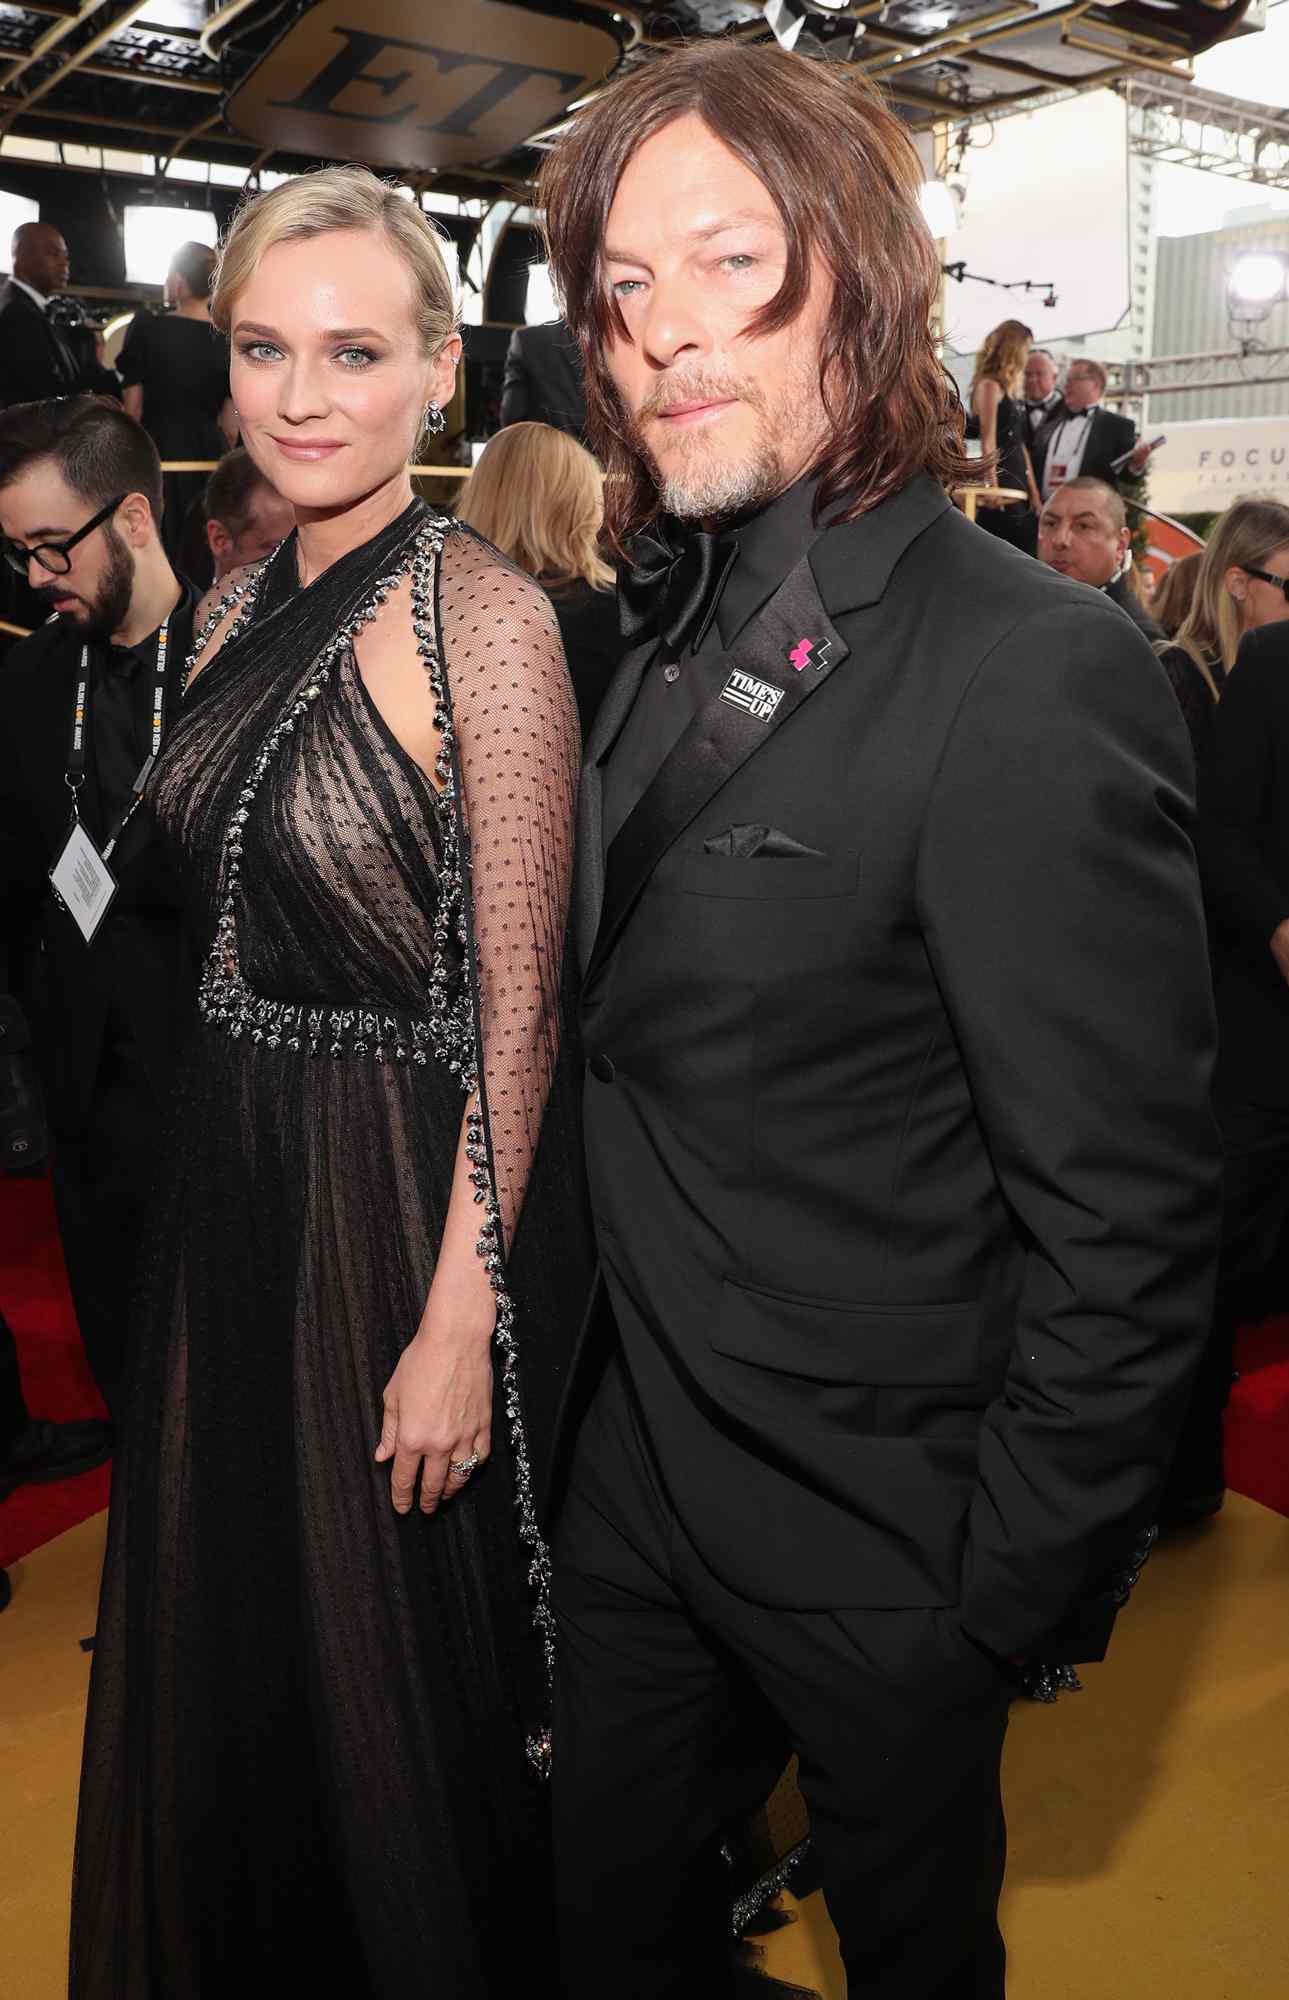 Actors Diane Kruger and Norman Reedus arrive to the 75th Annual Golden Globe Awards held at the Beverly Hilton Hotel on January 7, 2018